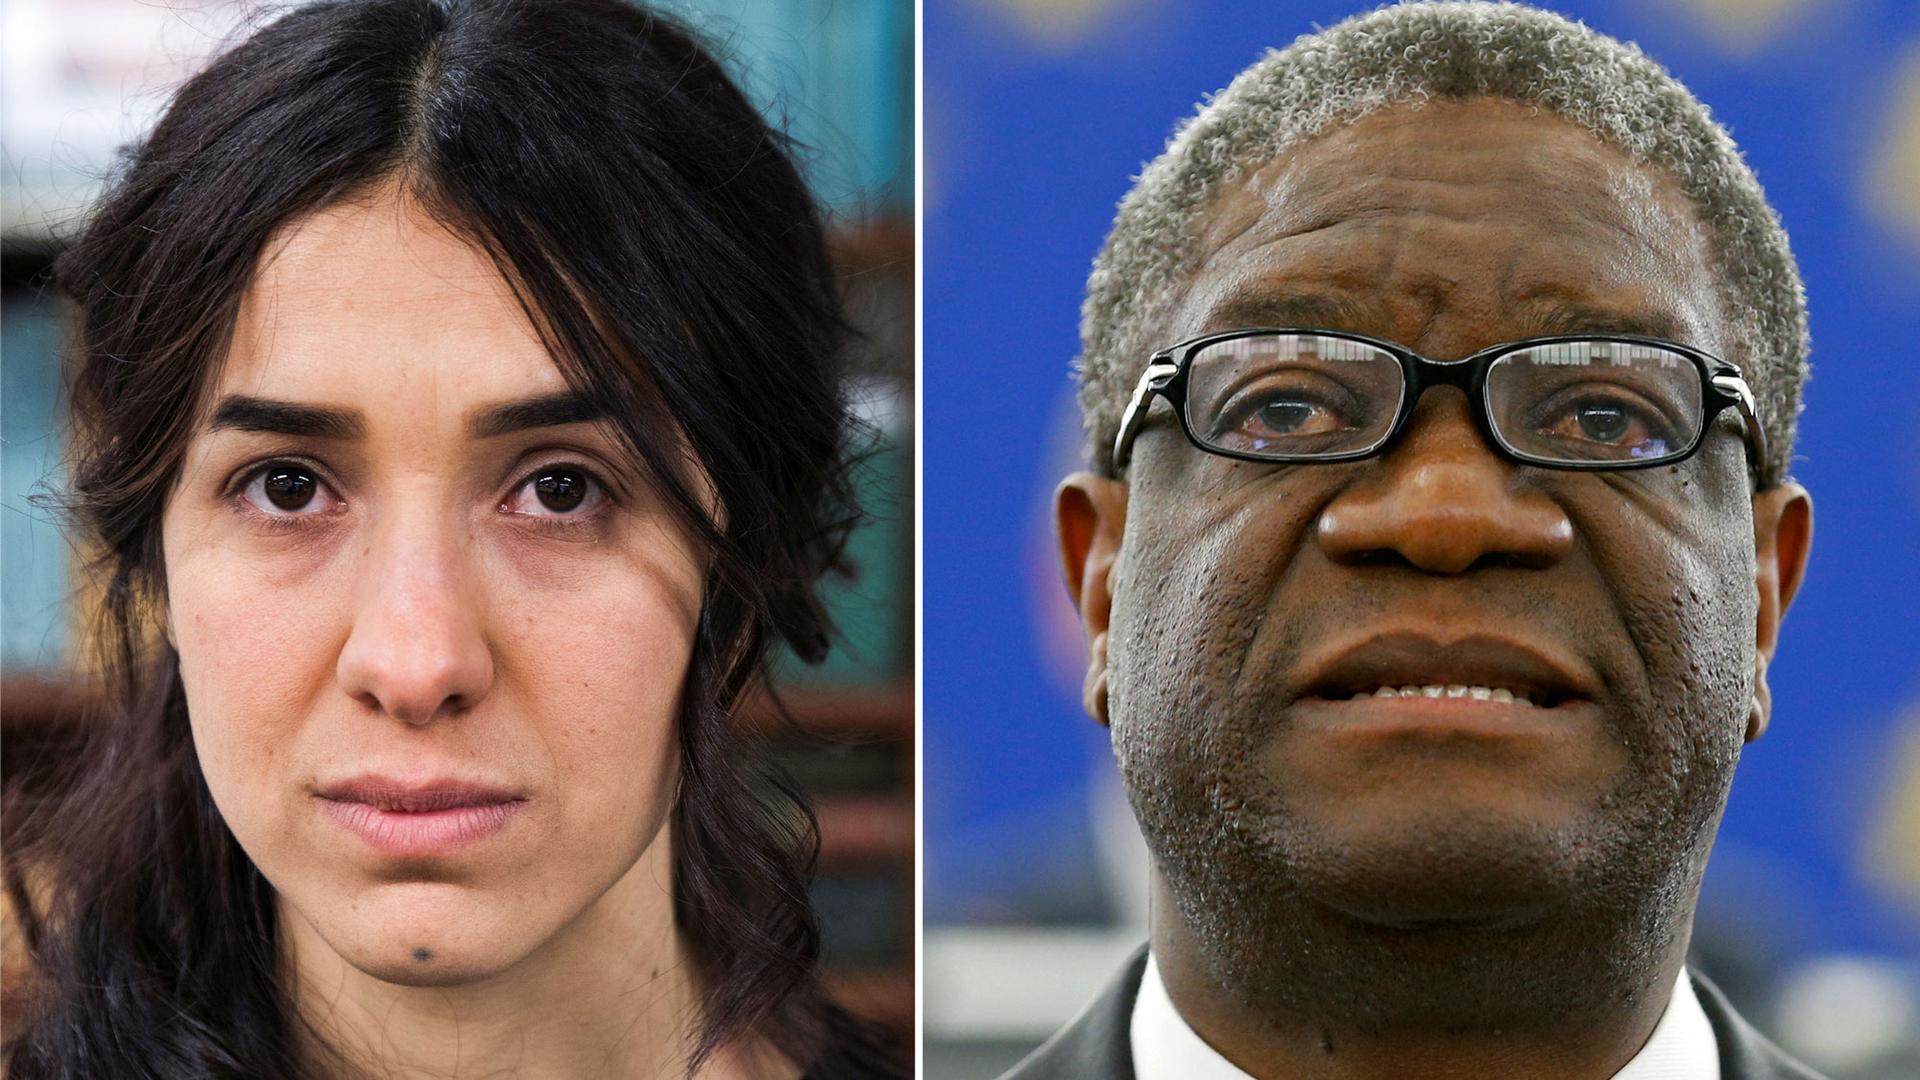 This is a combined composition with two portraits: Yazidi survivor Nadia Murad on the left and Denis Mukwege on the right.